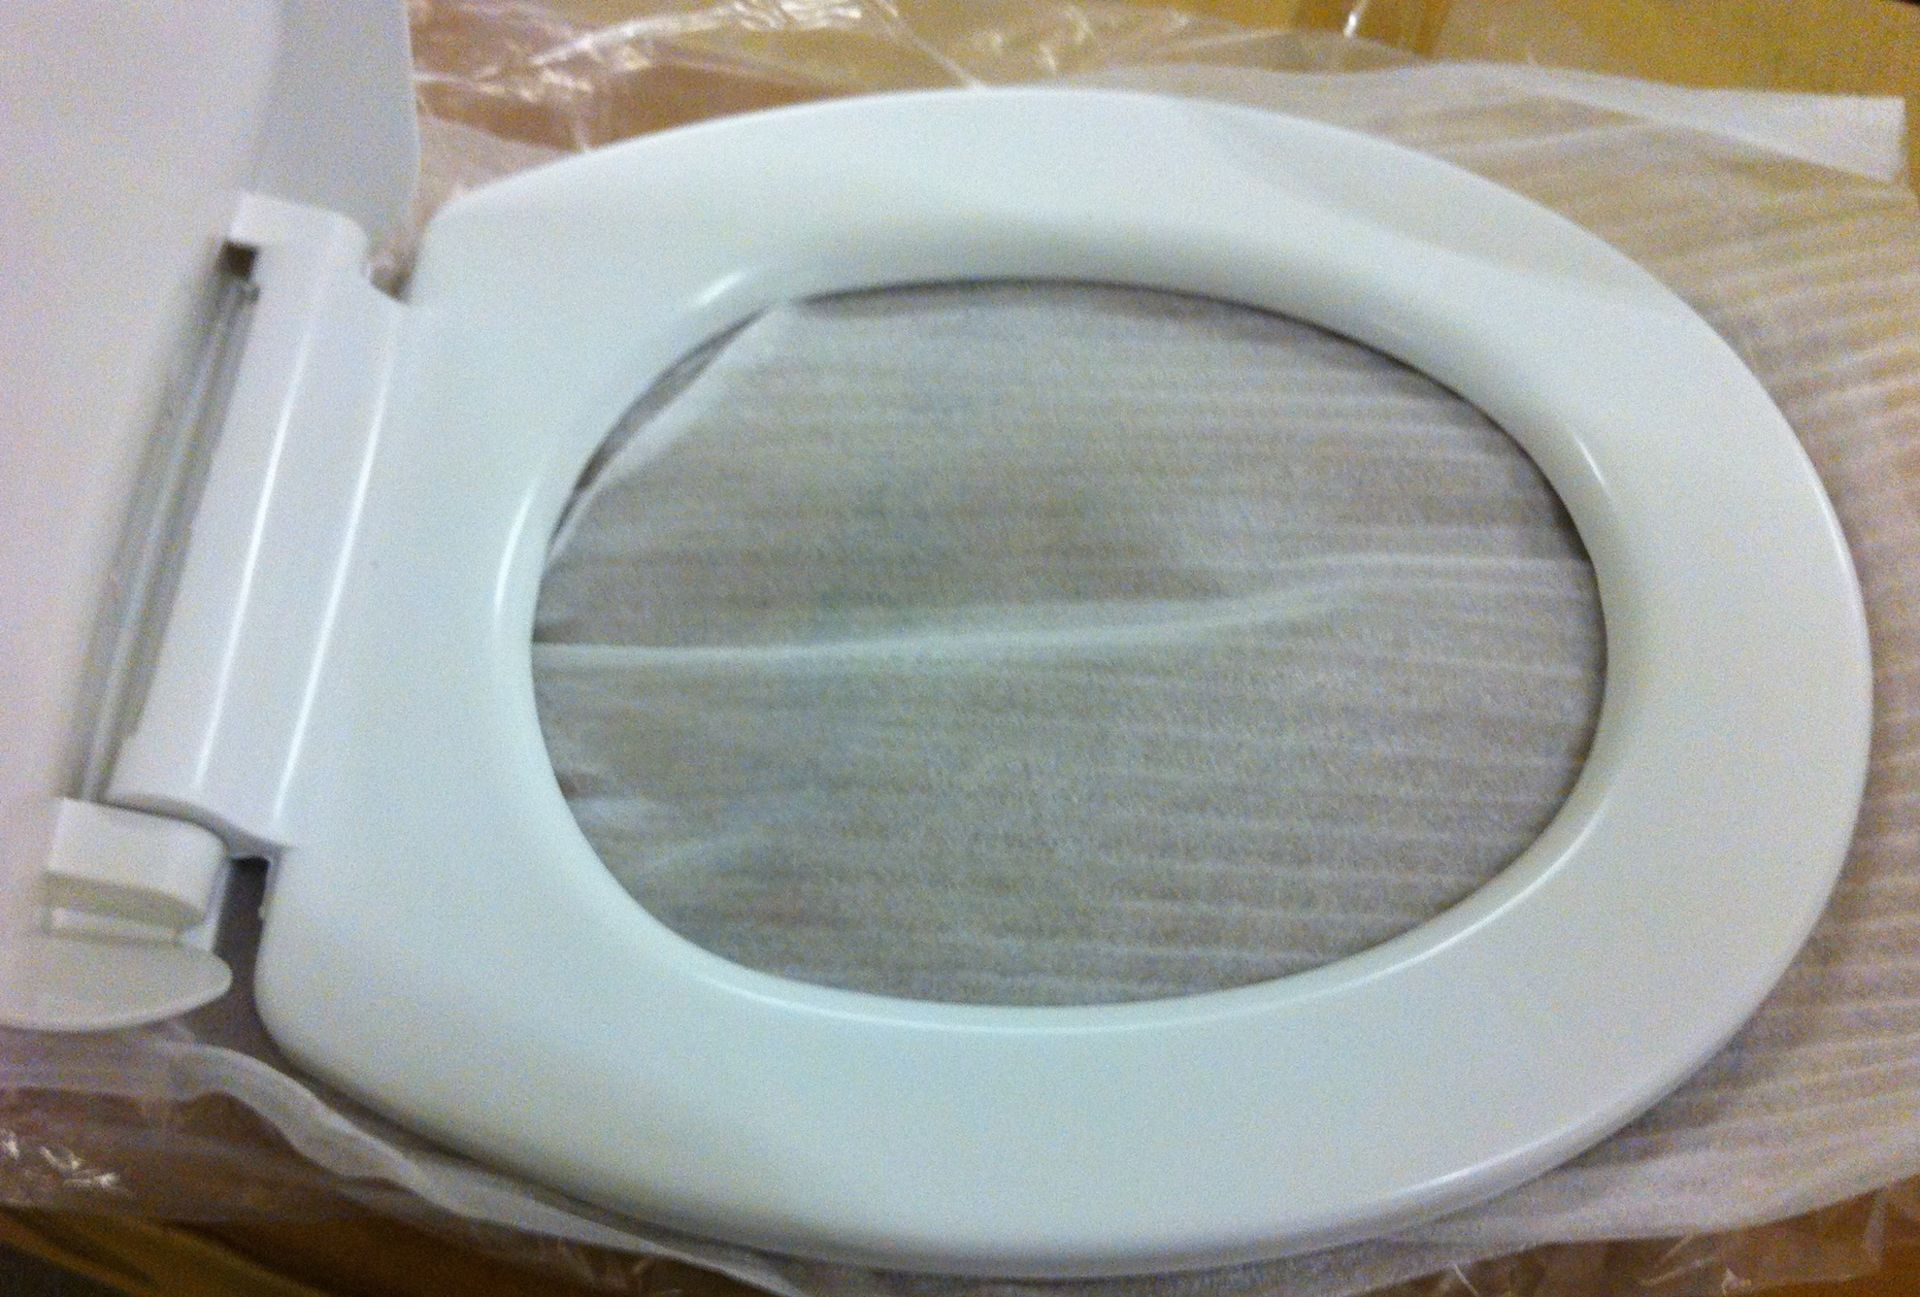 10 x Deluxe Soft Close White Toilet Seats - Brand New Boxed Stock - CL034 - Ideal For Resale - Vogue - Image 2 of 6